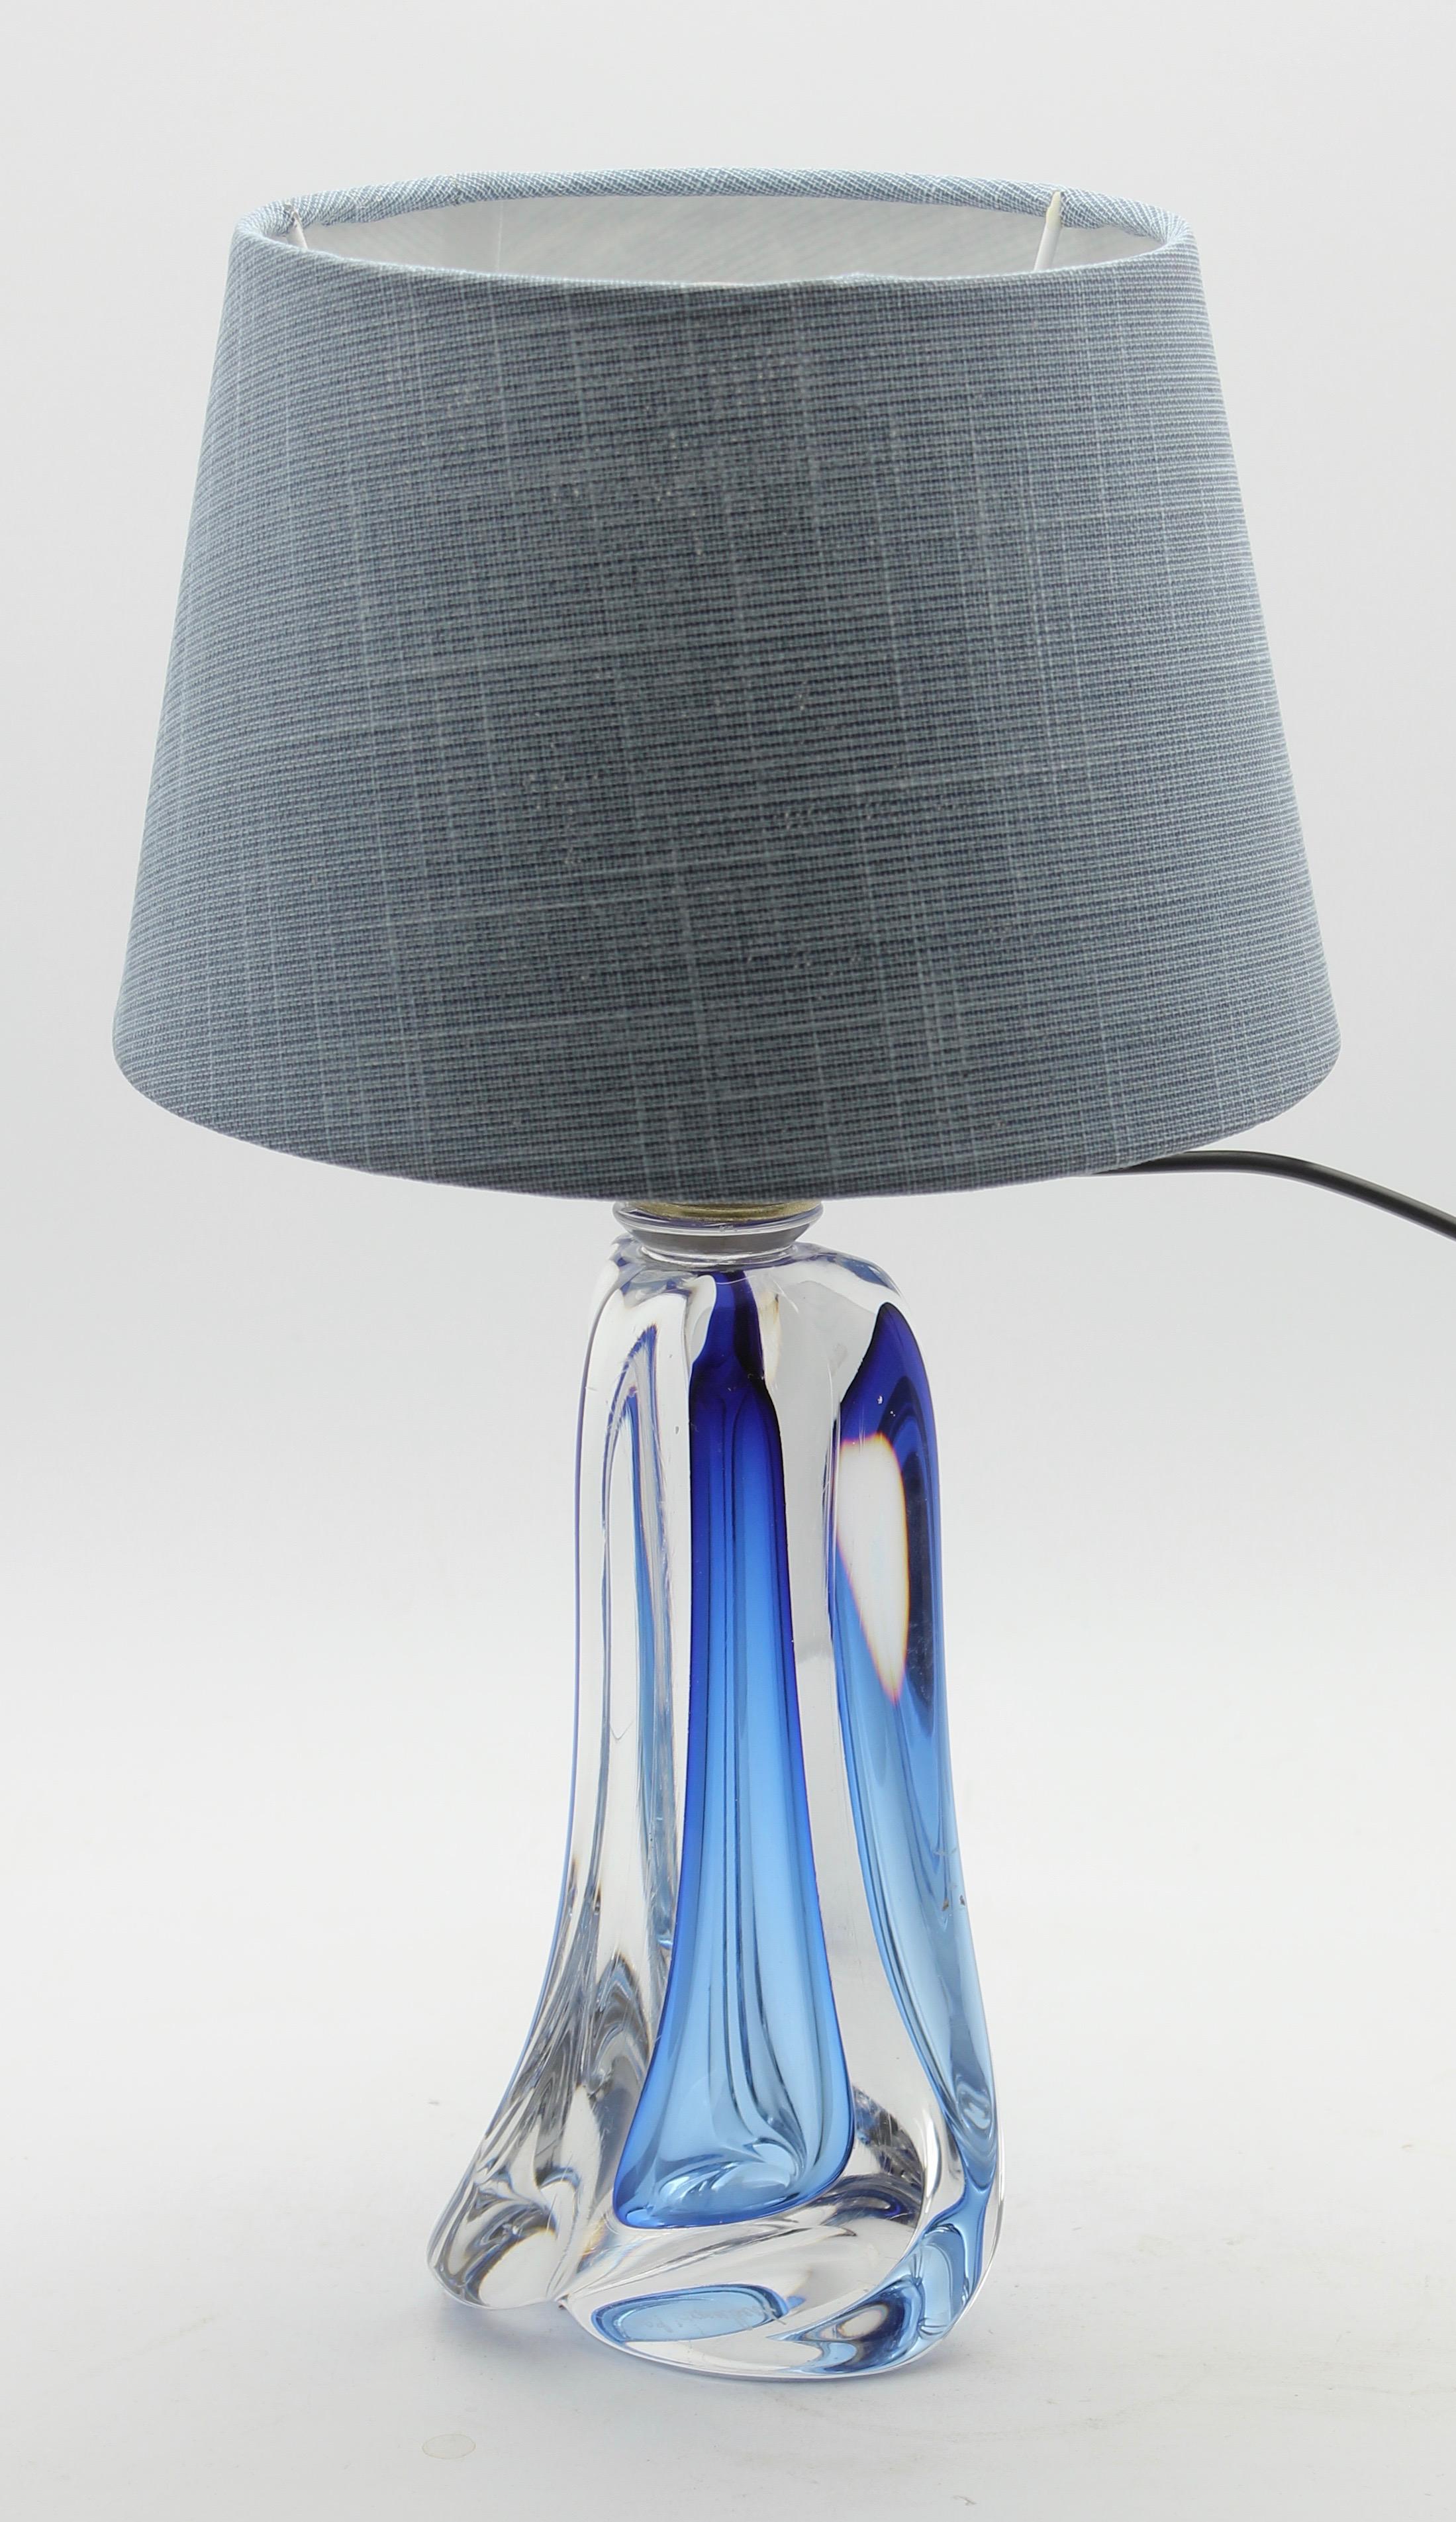 Val St Lambert is a Belgian crystal glassware manufacturer, founded in 1826 and based in Seraing. 
It is the official glassware supplier to King Albert II.

The sizes are measured without lamp shade.

Weight crystal lamp: 1.8 kg 3.96